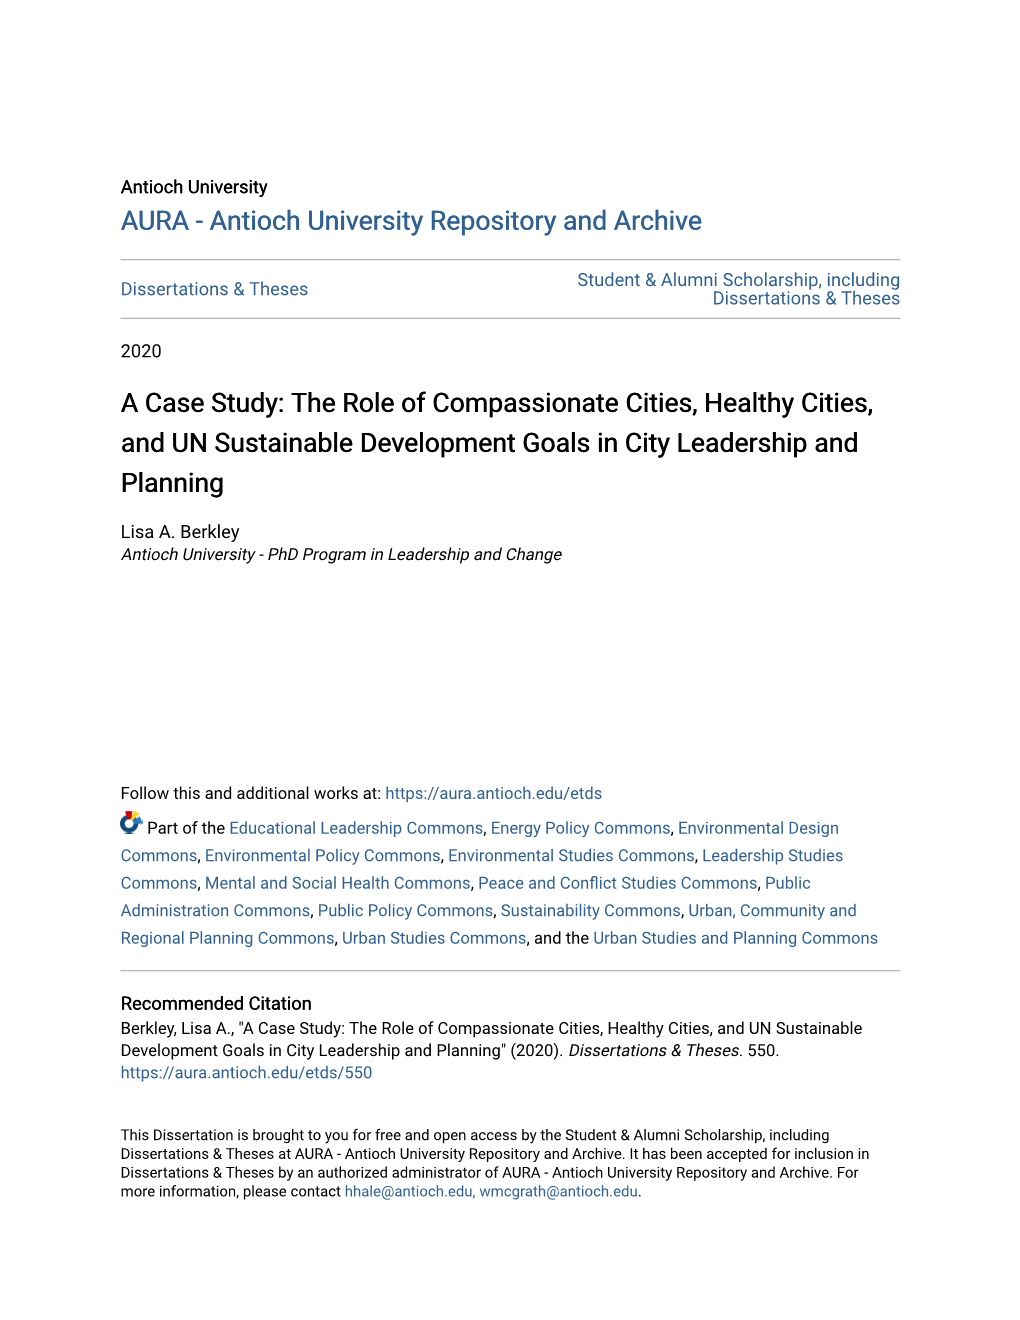 The Role of Compassionate Cities, Healthy Cities, and UN Sustainable Development Goals in City Leadership and Planning